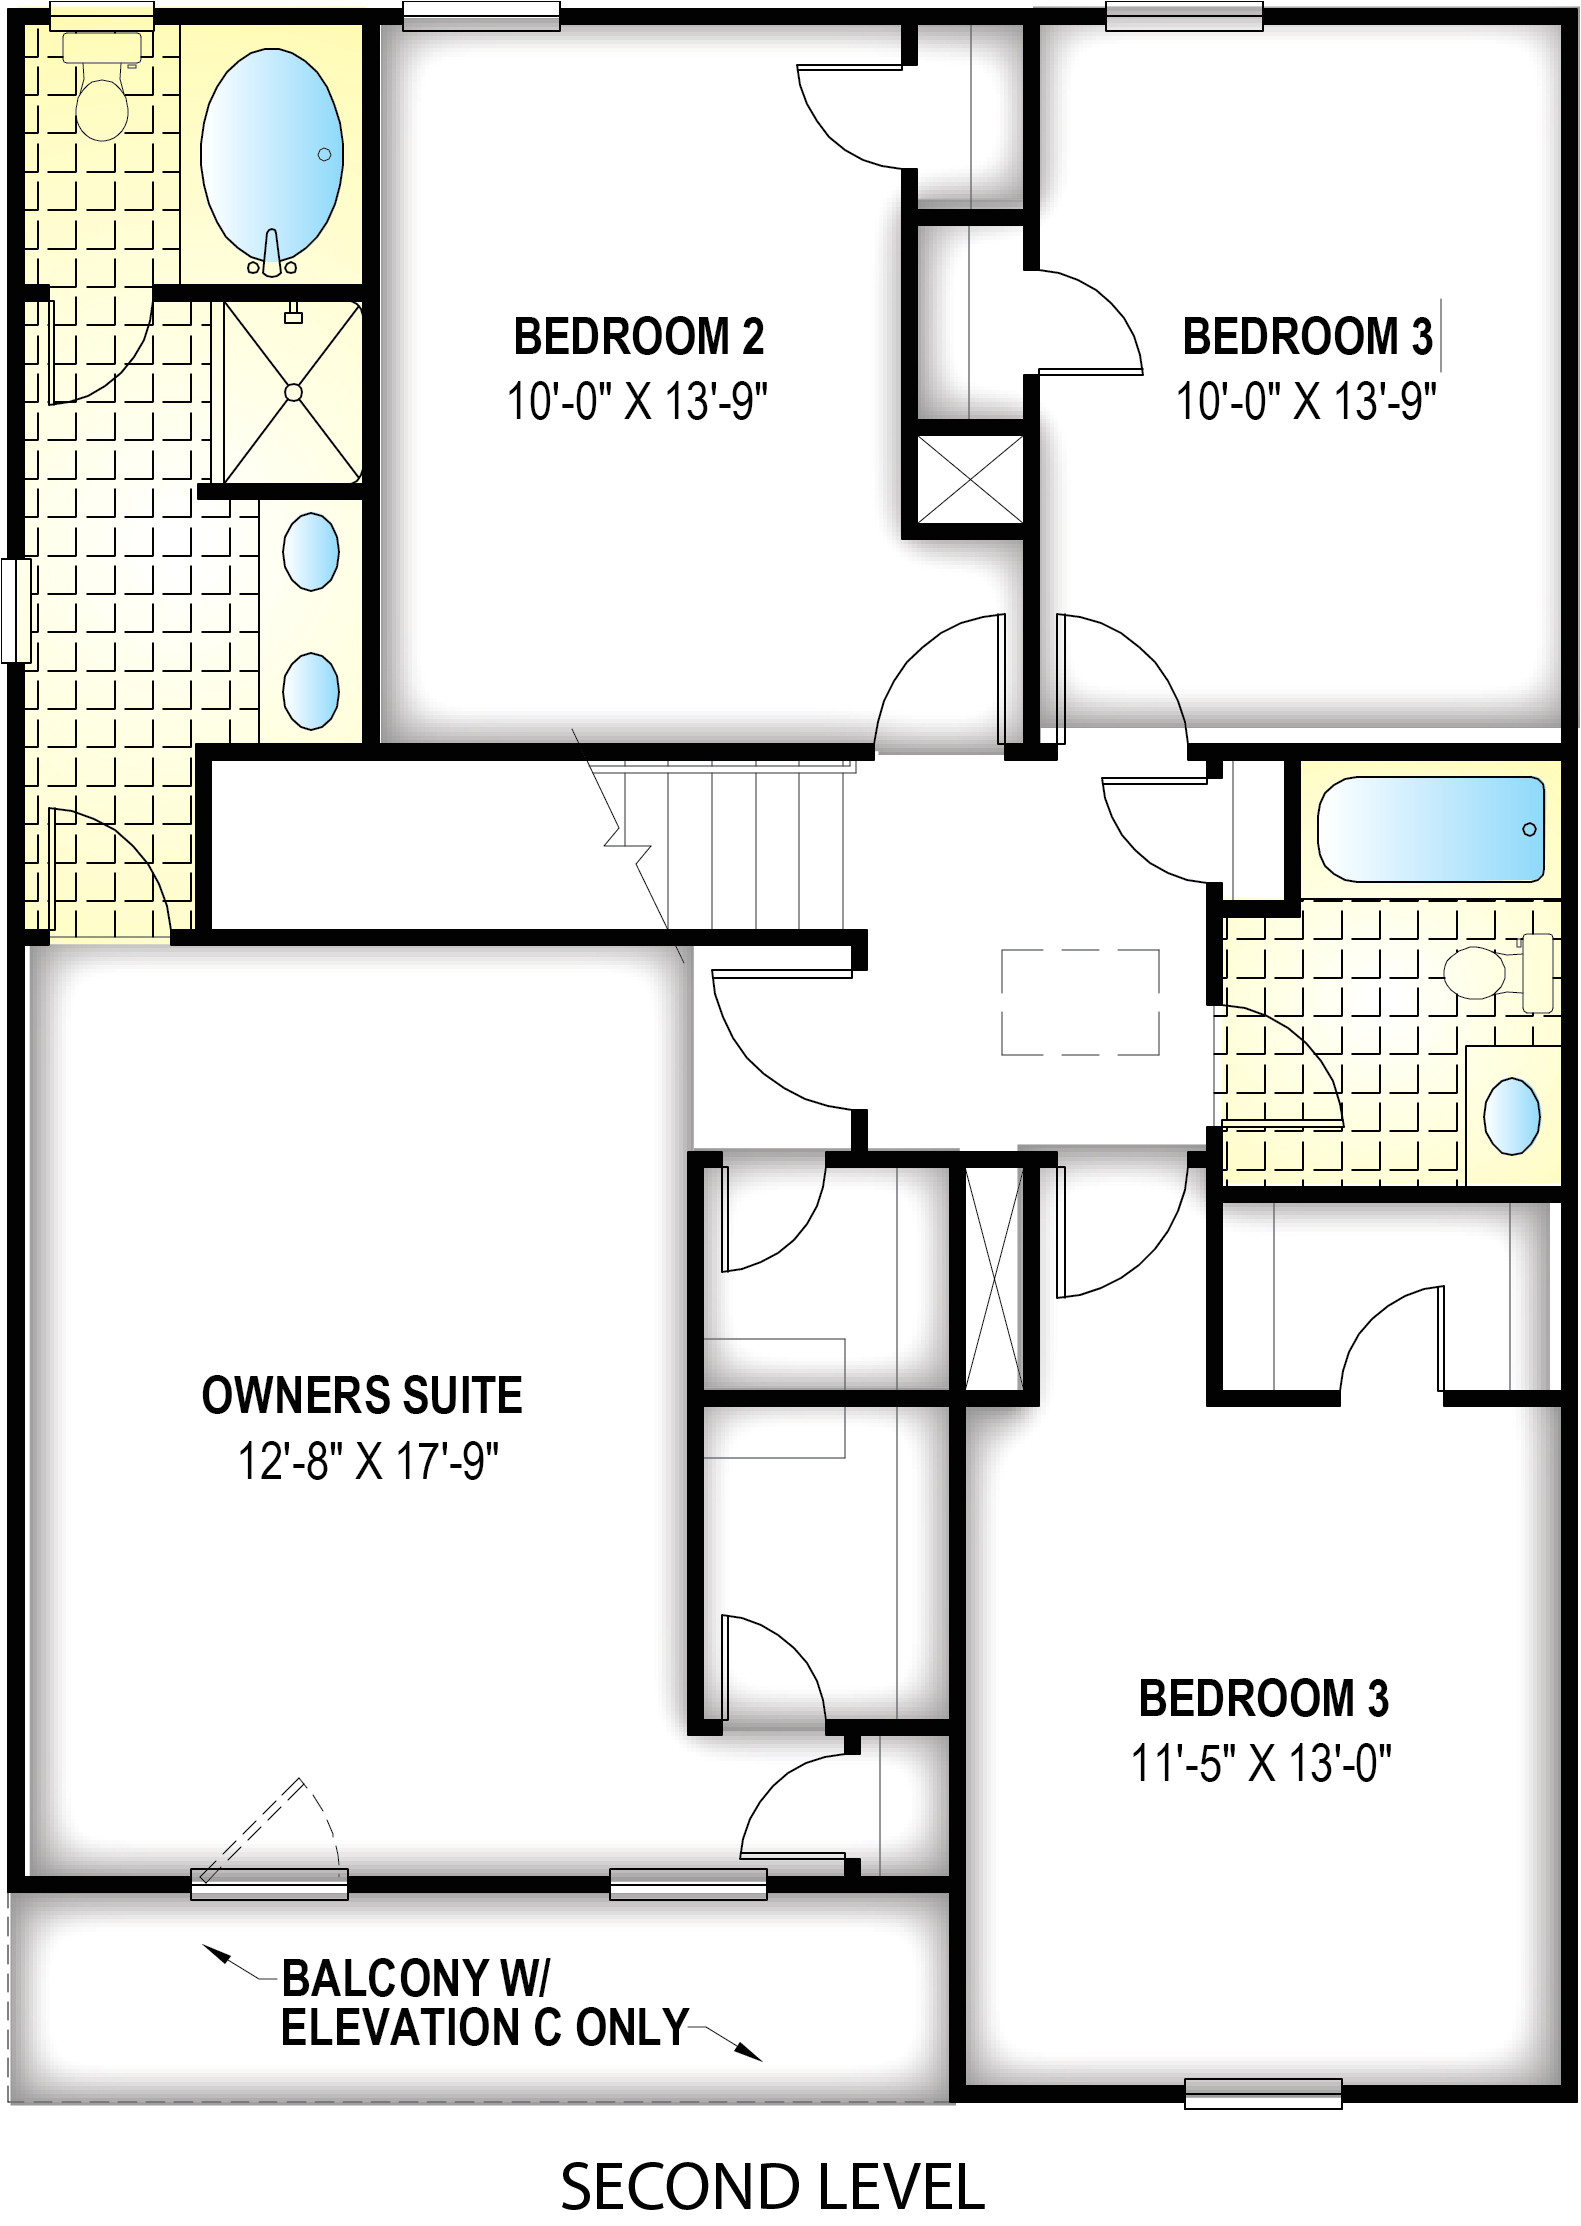 Great southern Homes Floor Plans Great southern Homes Floor Plans Great southern Homes